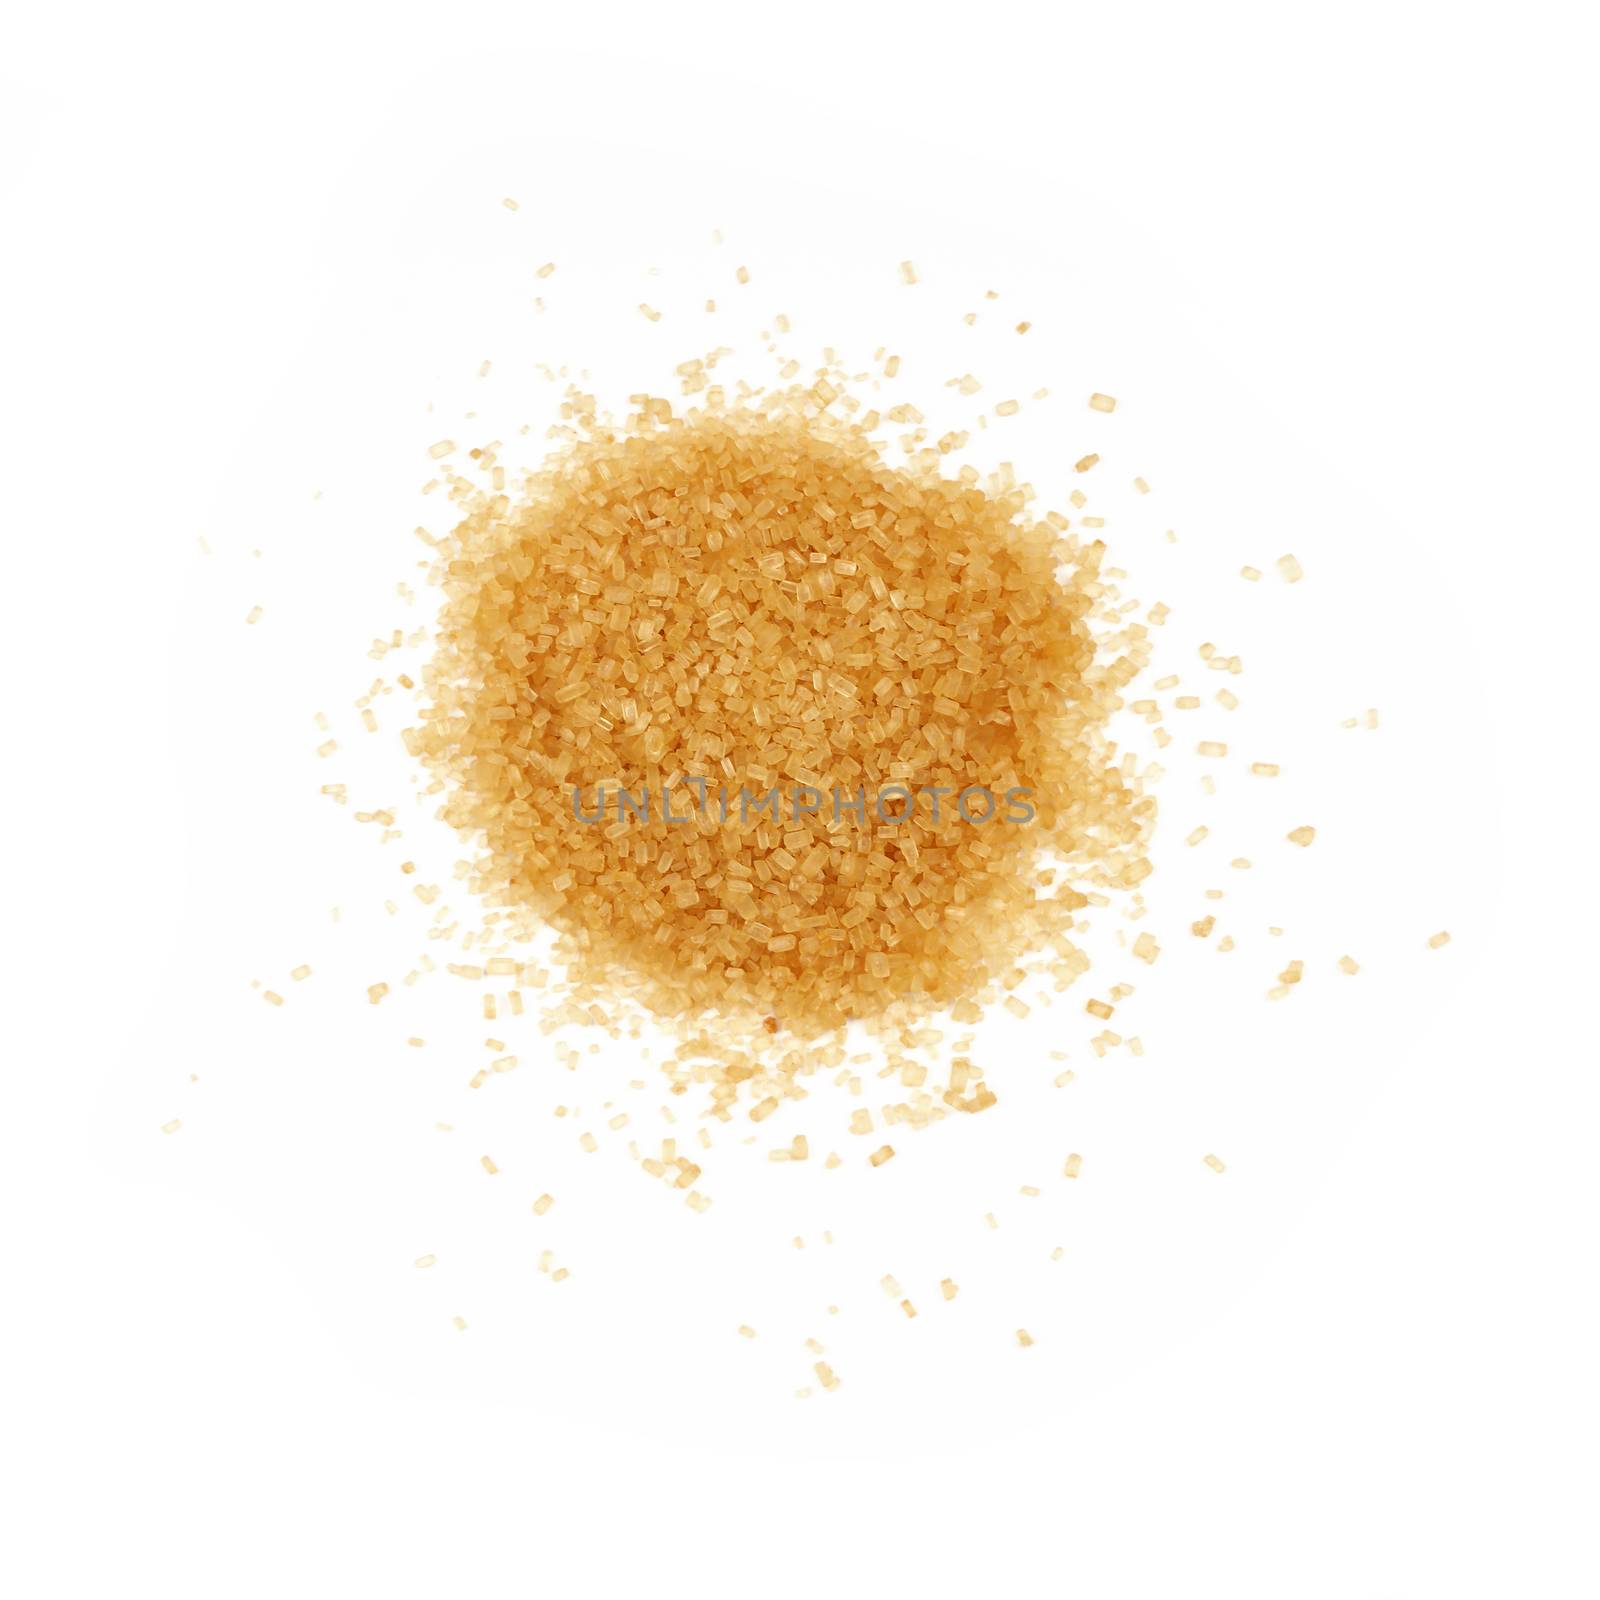 Pinch of brown cane sugar spilled on white by BreakingTheWalls